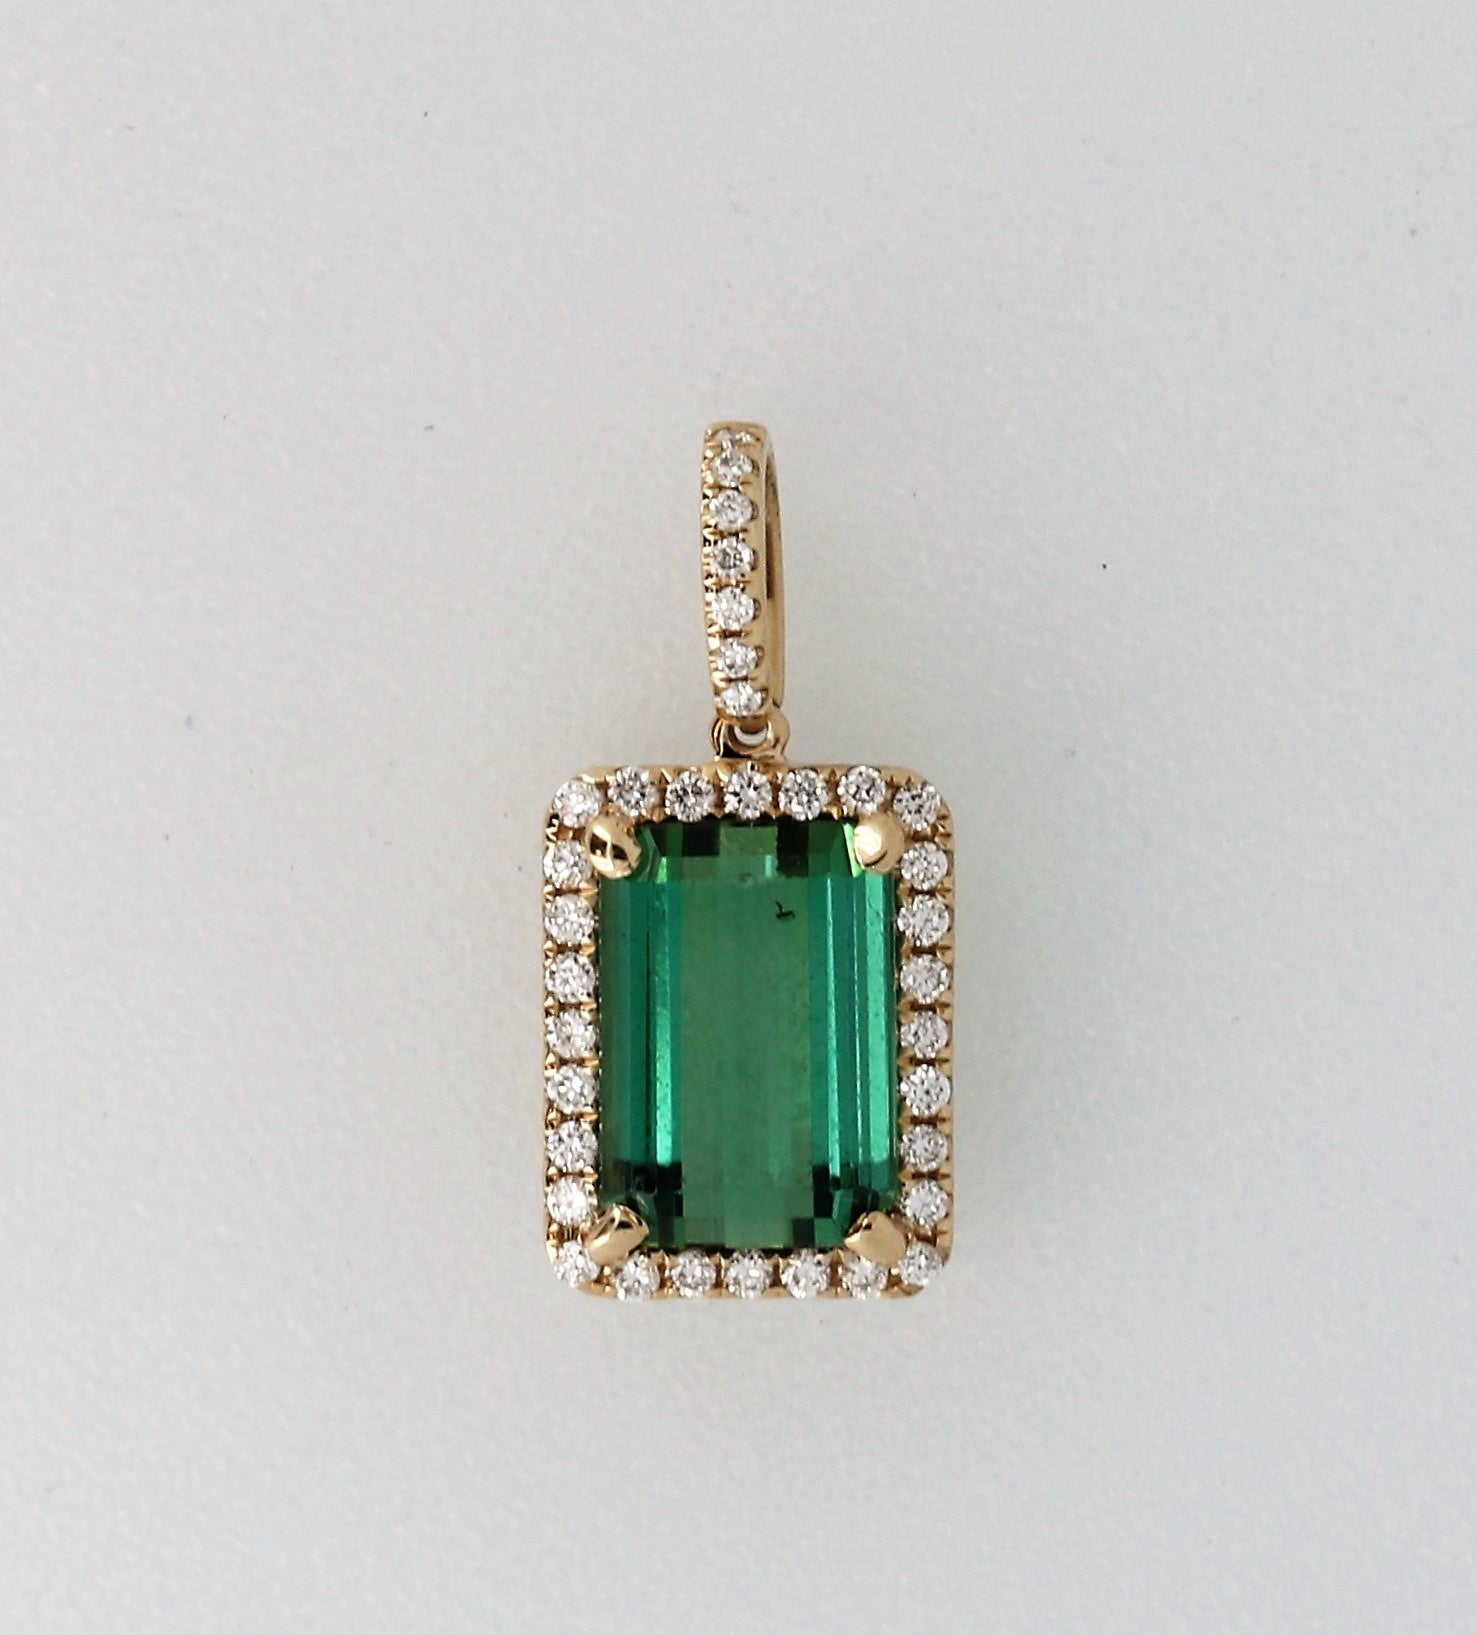 Emerald Cut Natural Green Tourmaline Pendant With Halo Setting, In 14Kt Yellow Gold